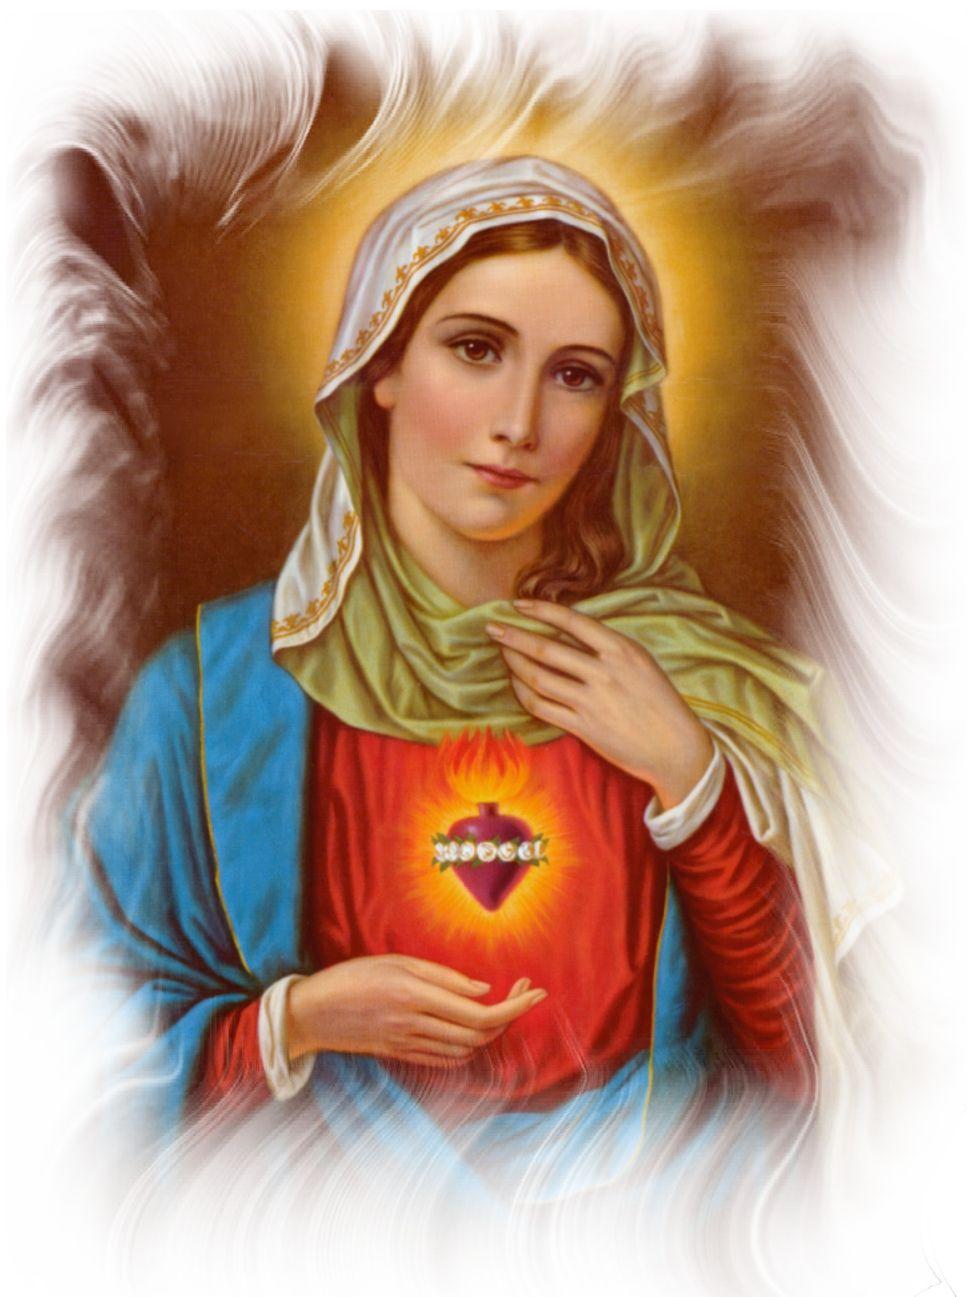 Blessed Virgin Mary. image credit catholic tradition org visit to